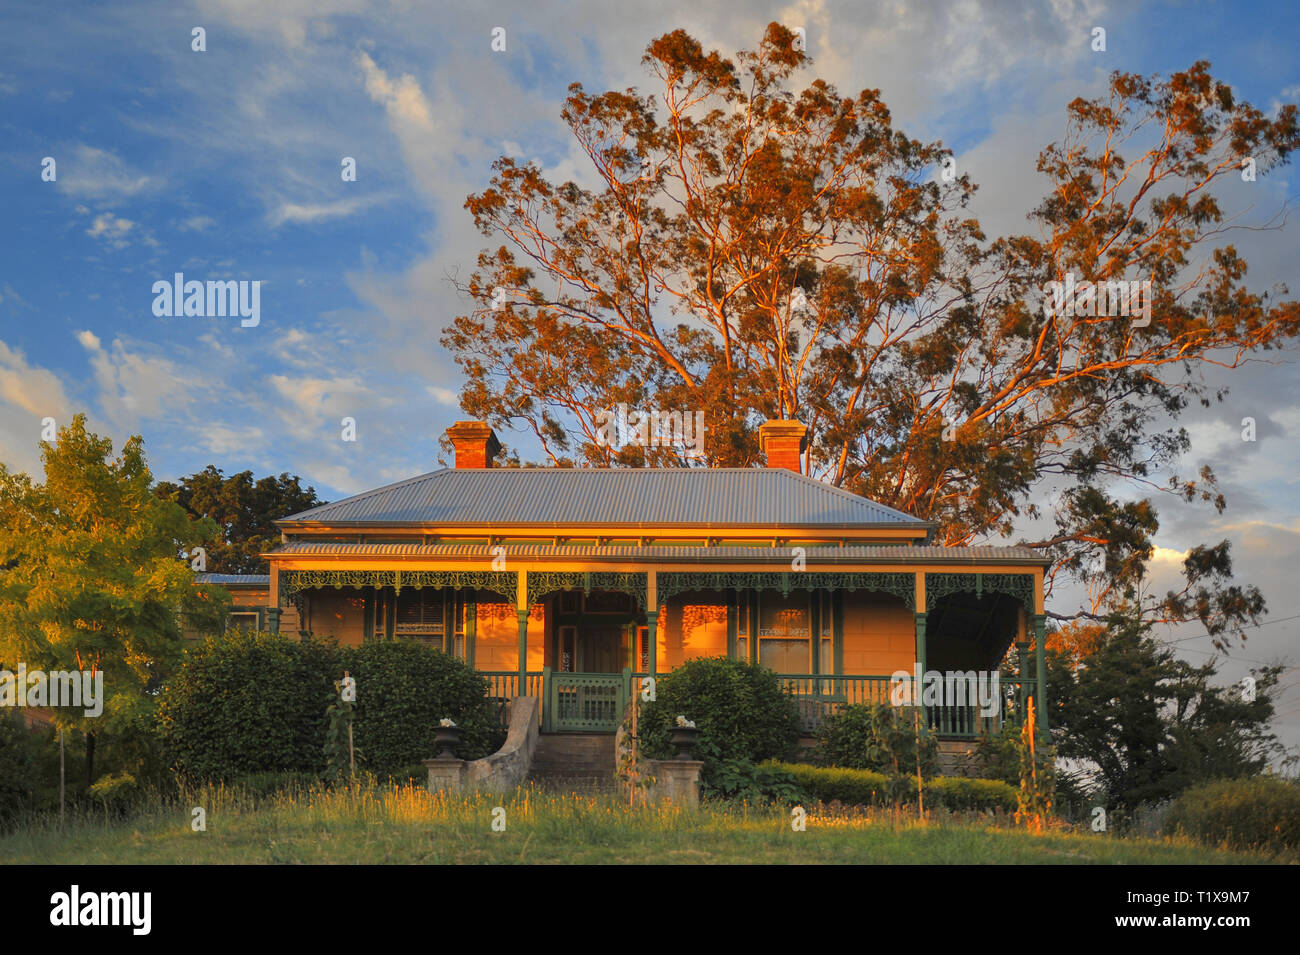 Typical turn of last century weatherboard home in Castlemaine, Victoria, Australia. Stock Photo